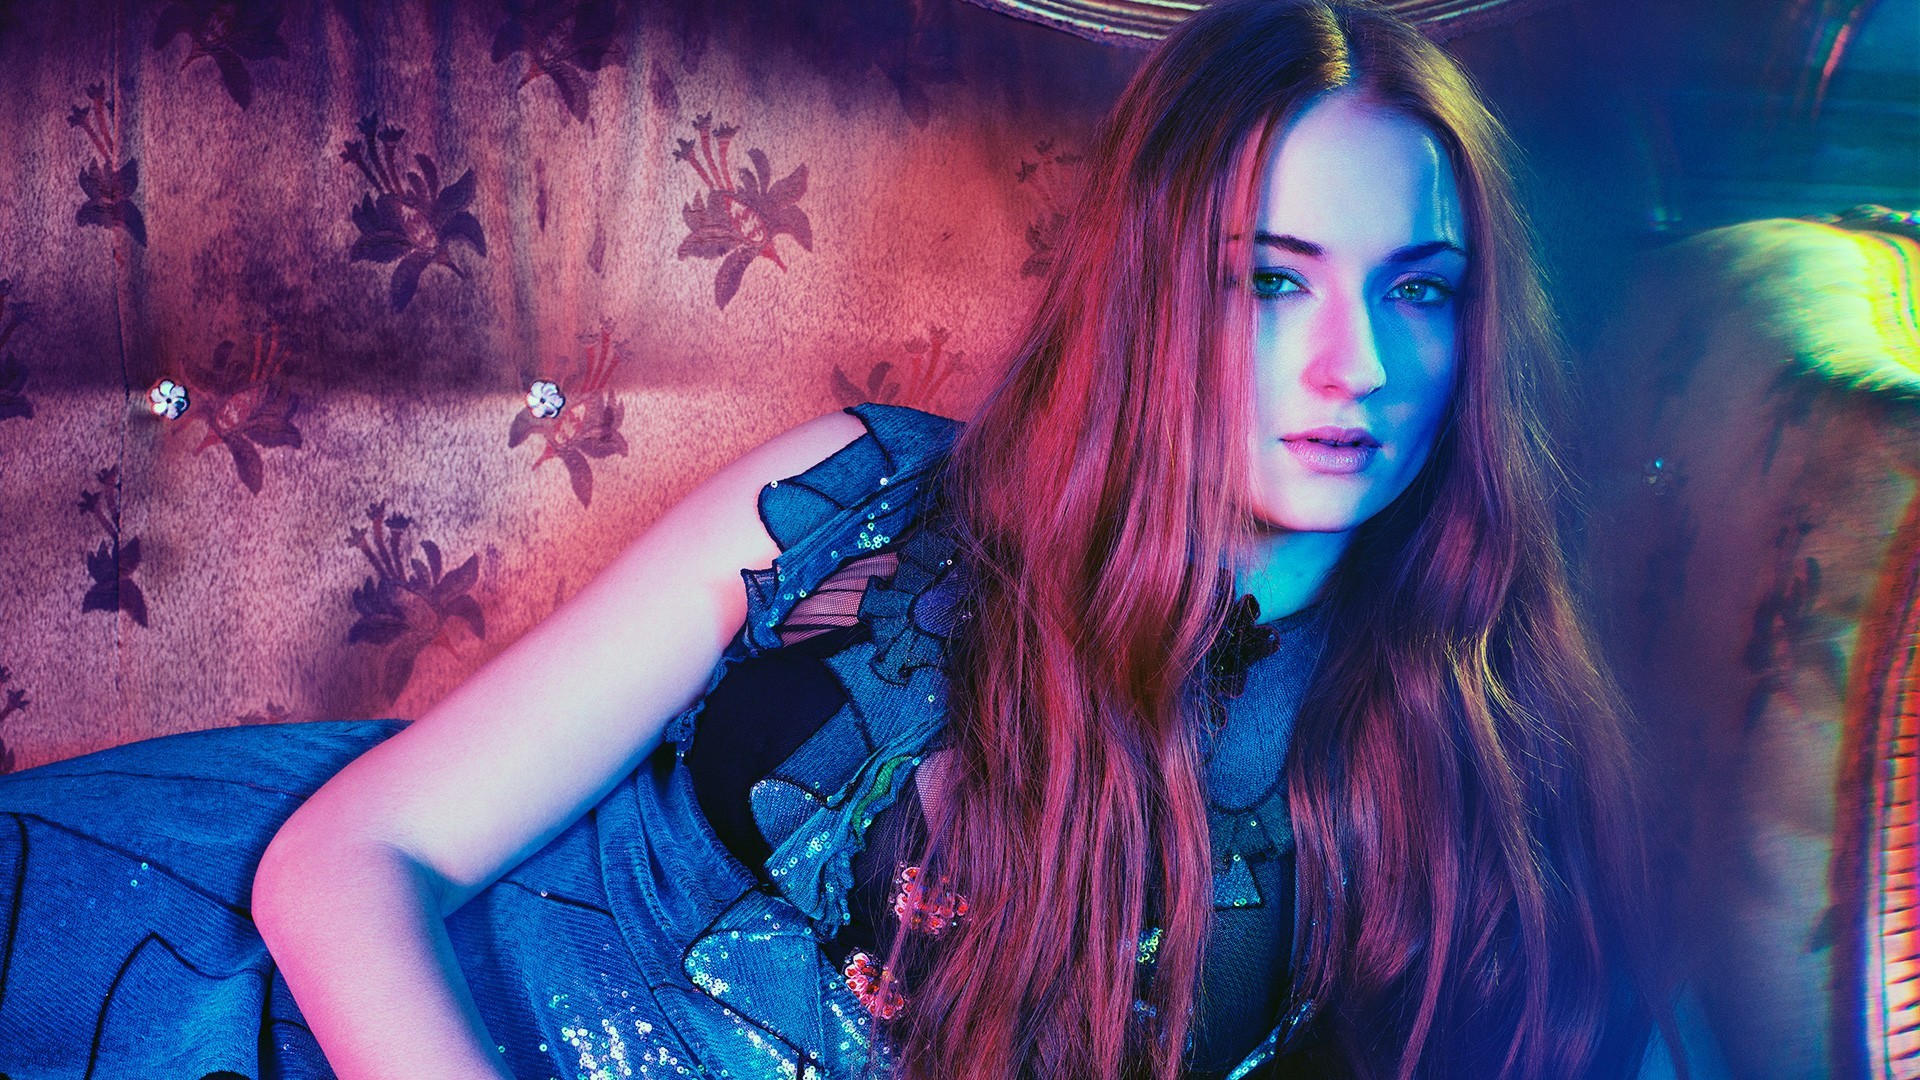 Wallpaper Sophie Turner, actress, red head